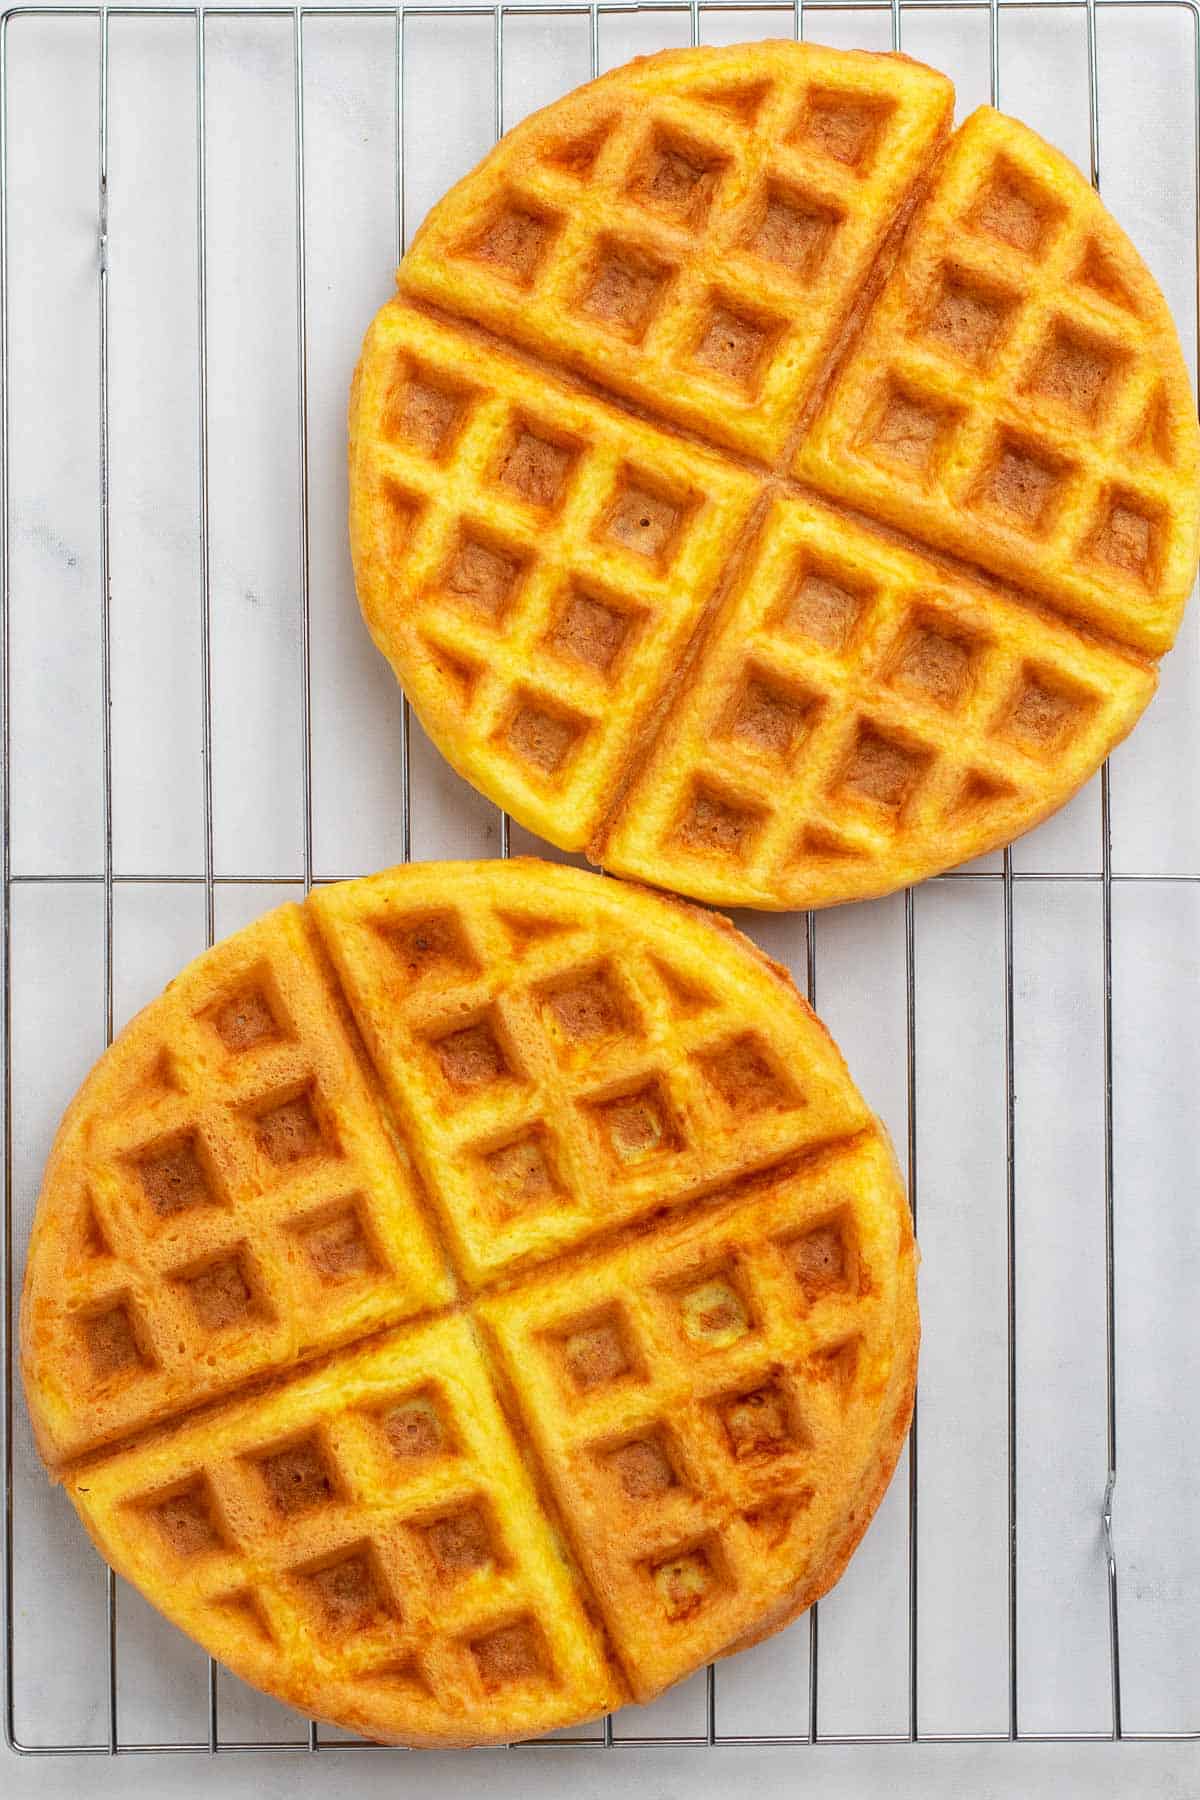 Two chaffles cooling on a wire rack, as seen from above